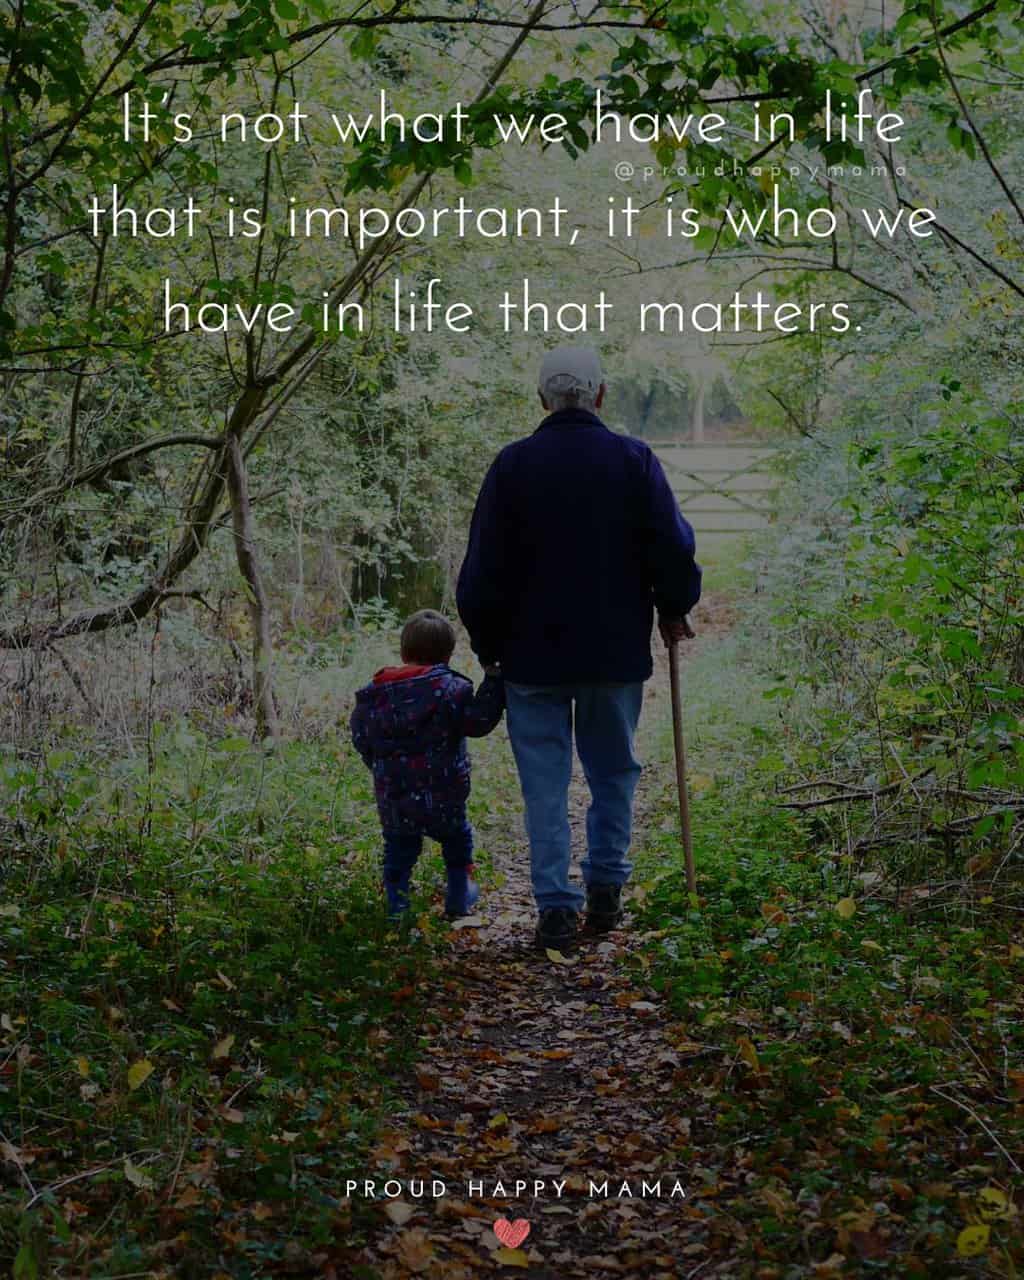 Grandfather walking with grandson in field with grandkids quote text overlay. ‘It’s not what we have in life that is important, it is who we have in life that matters.’